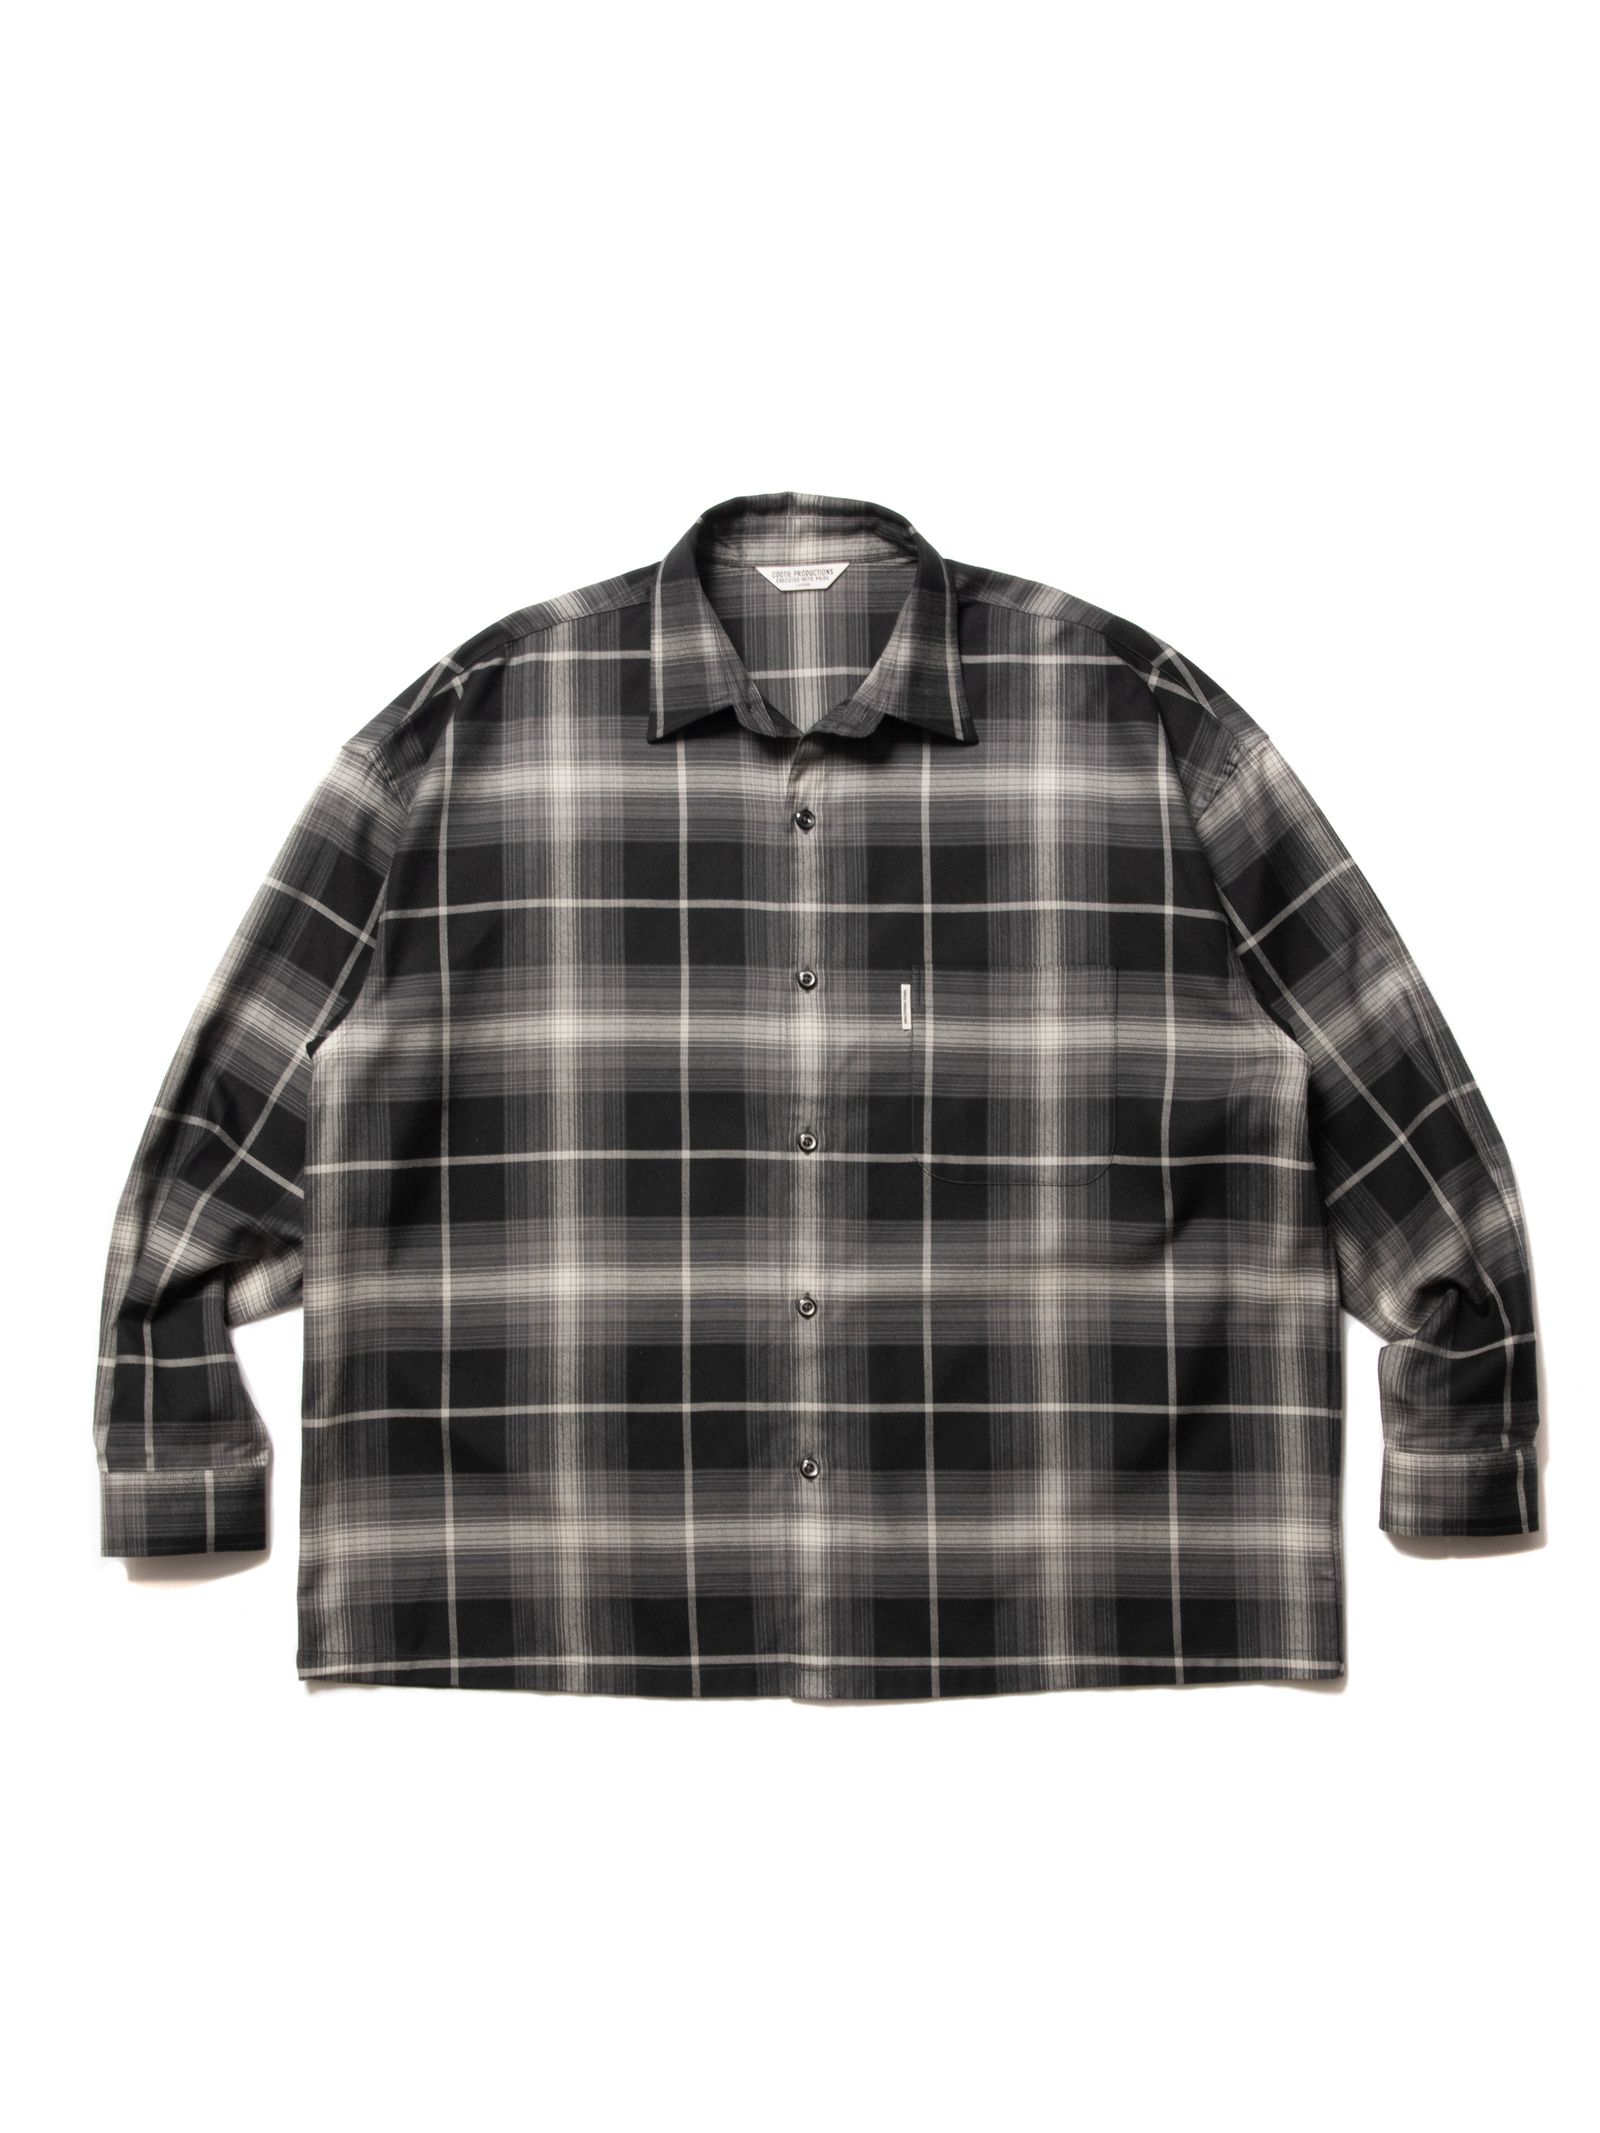 COOTIE PRODUCTIONS - R/C Ombre Check L/S Shirt (BLACK) / オンブレ